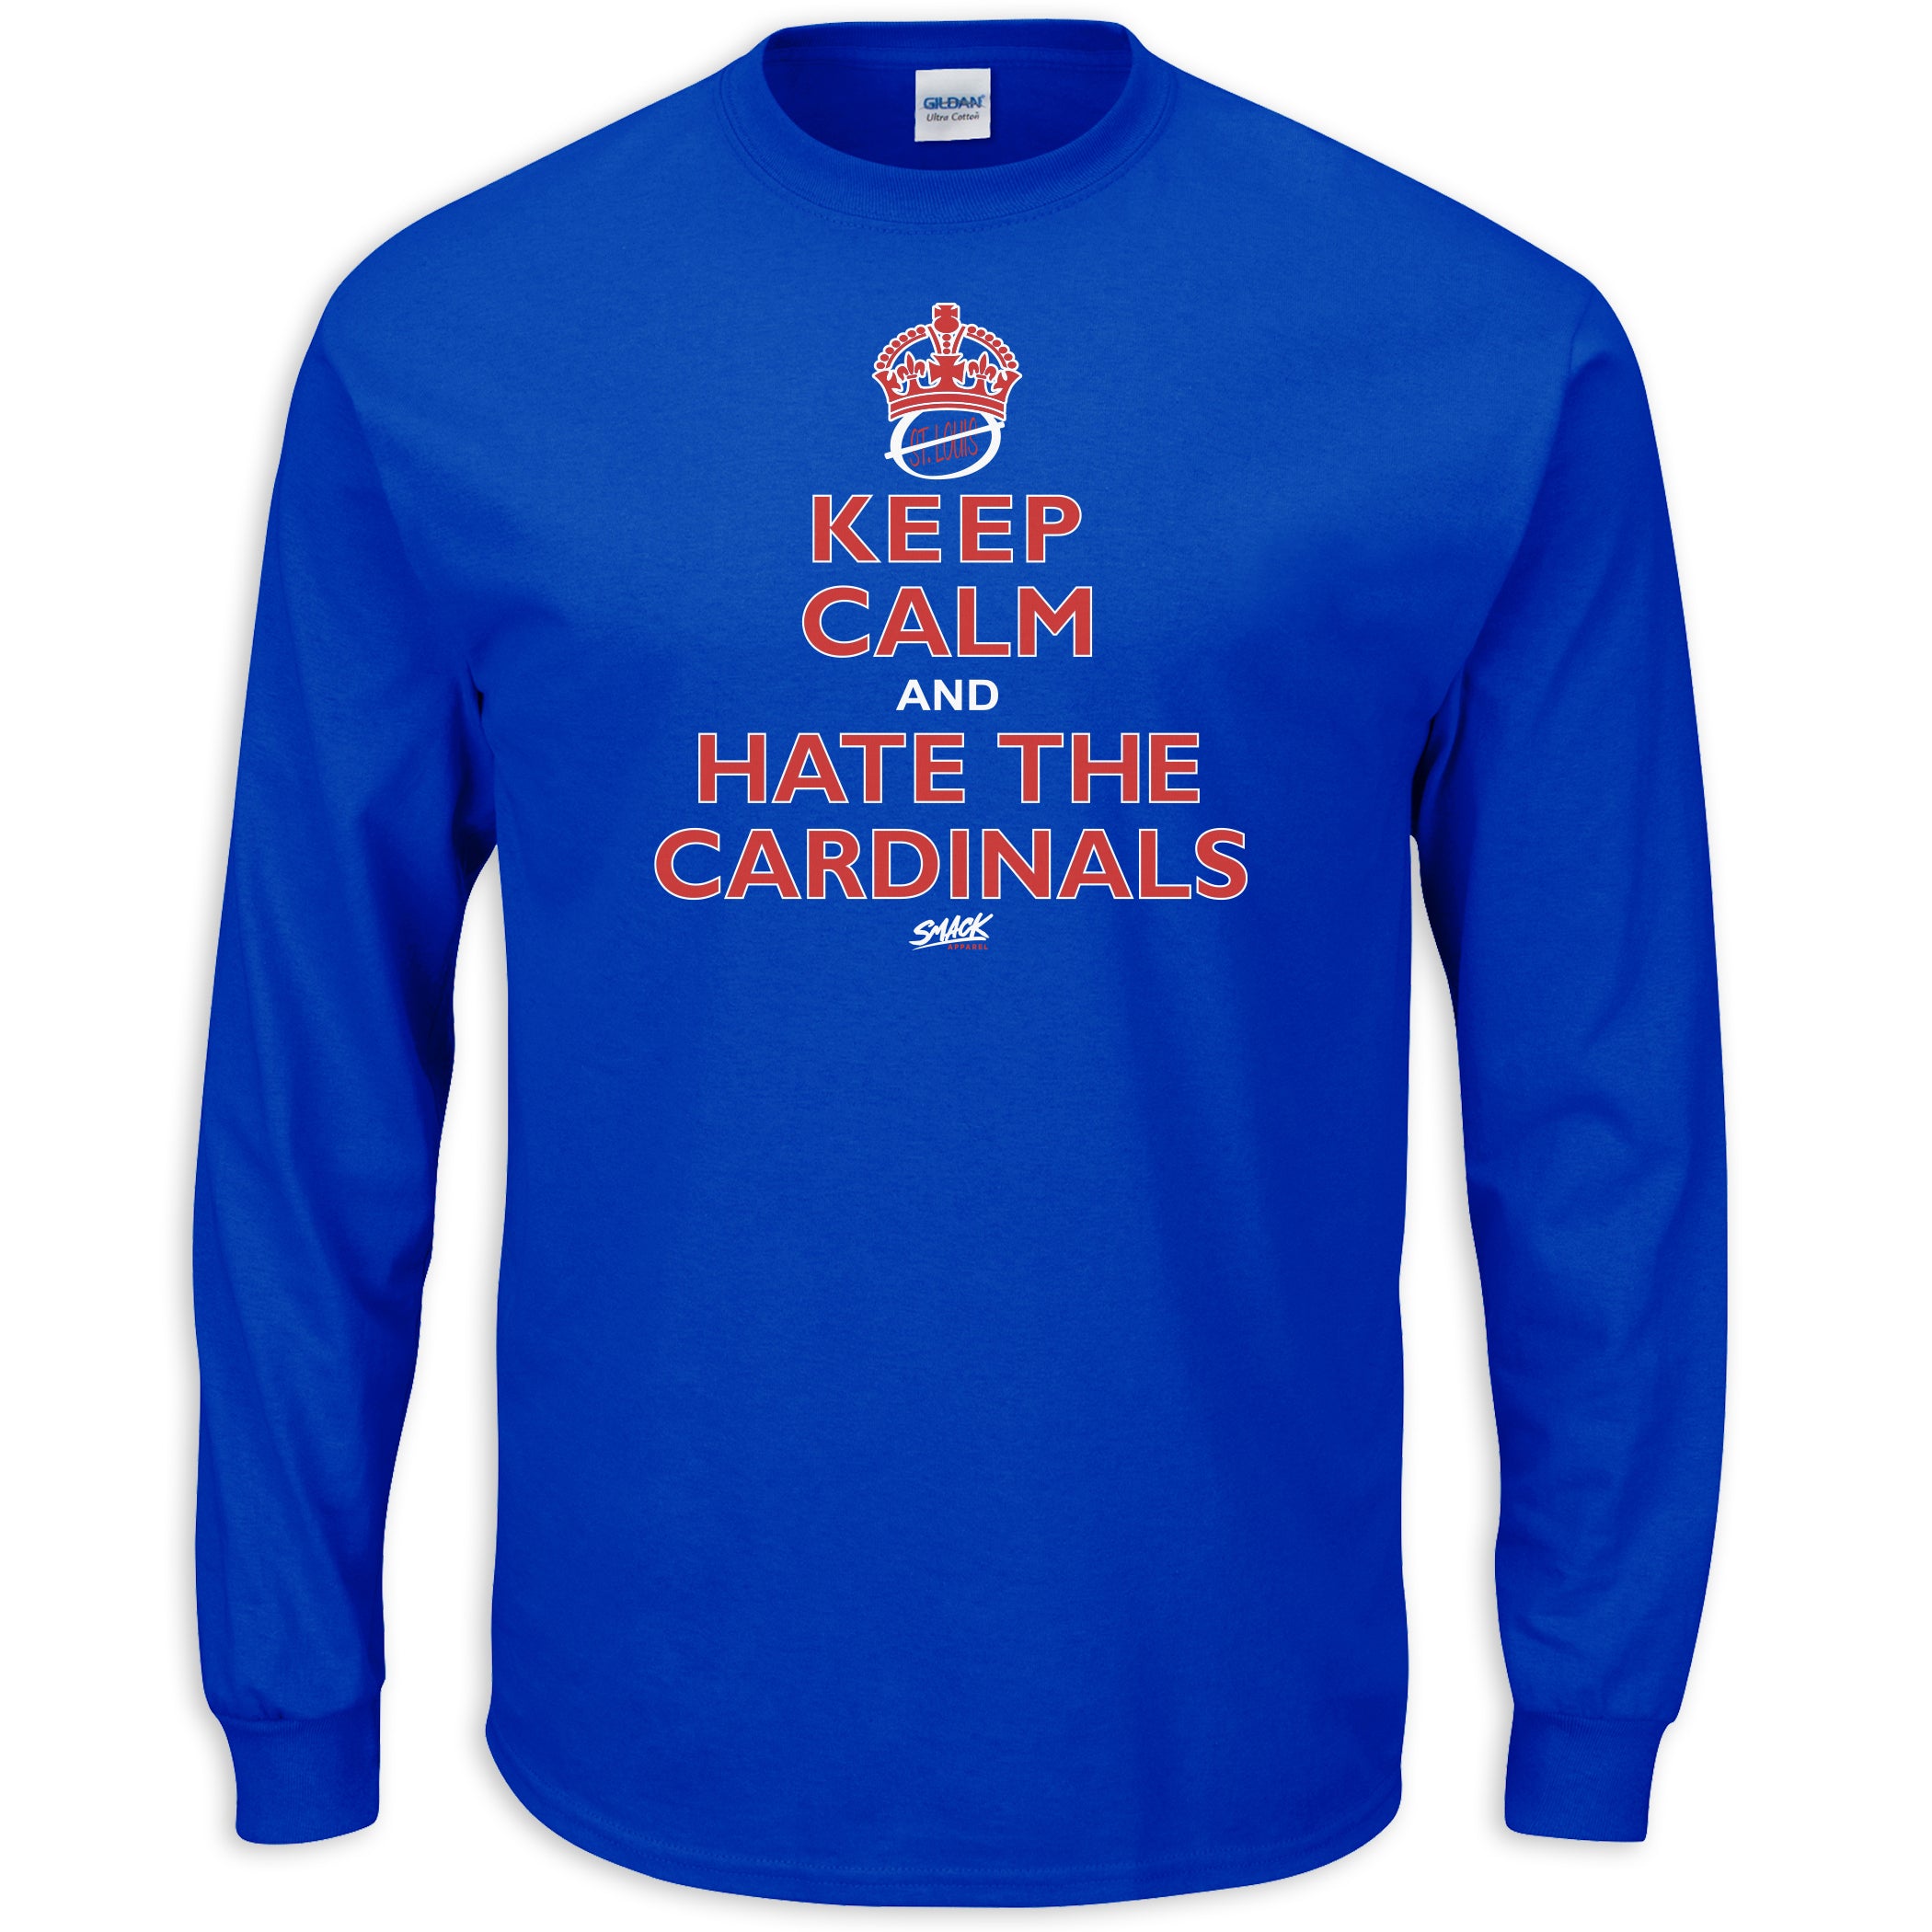 Keep Calm and Hate the Cardinals (Anti-St. Louis) Shirt